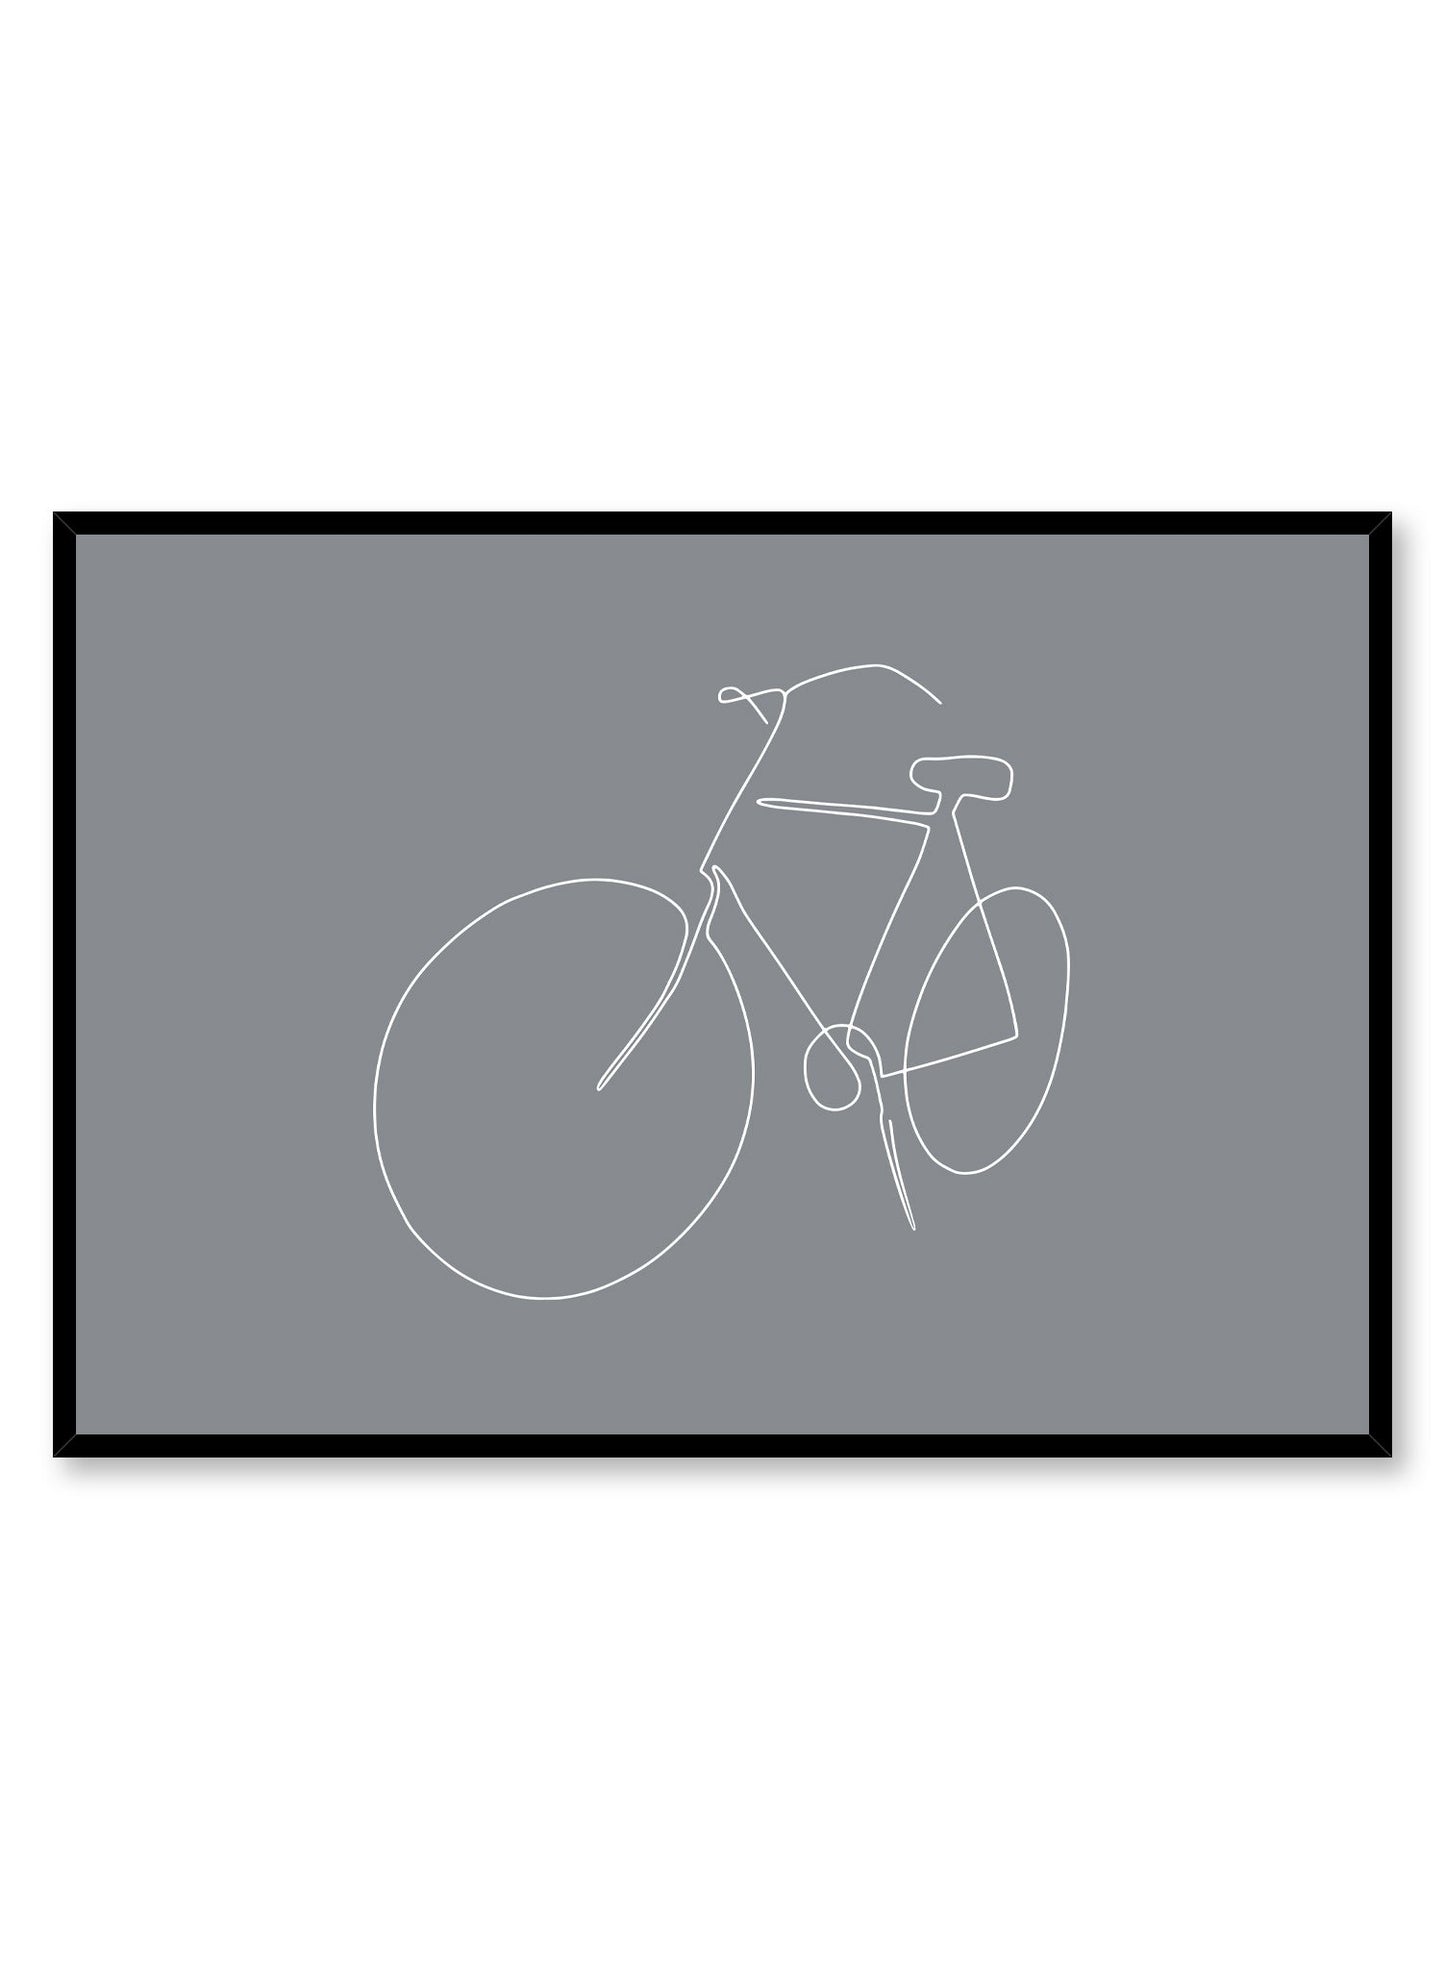 Modern minimalist poster by Opposite Wall with abstract illustration of Fresh Start with gray blue bacKground